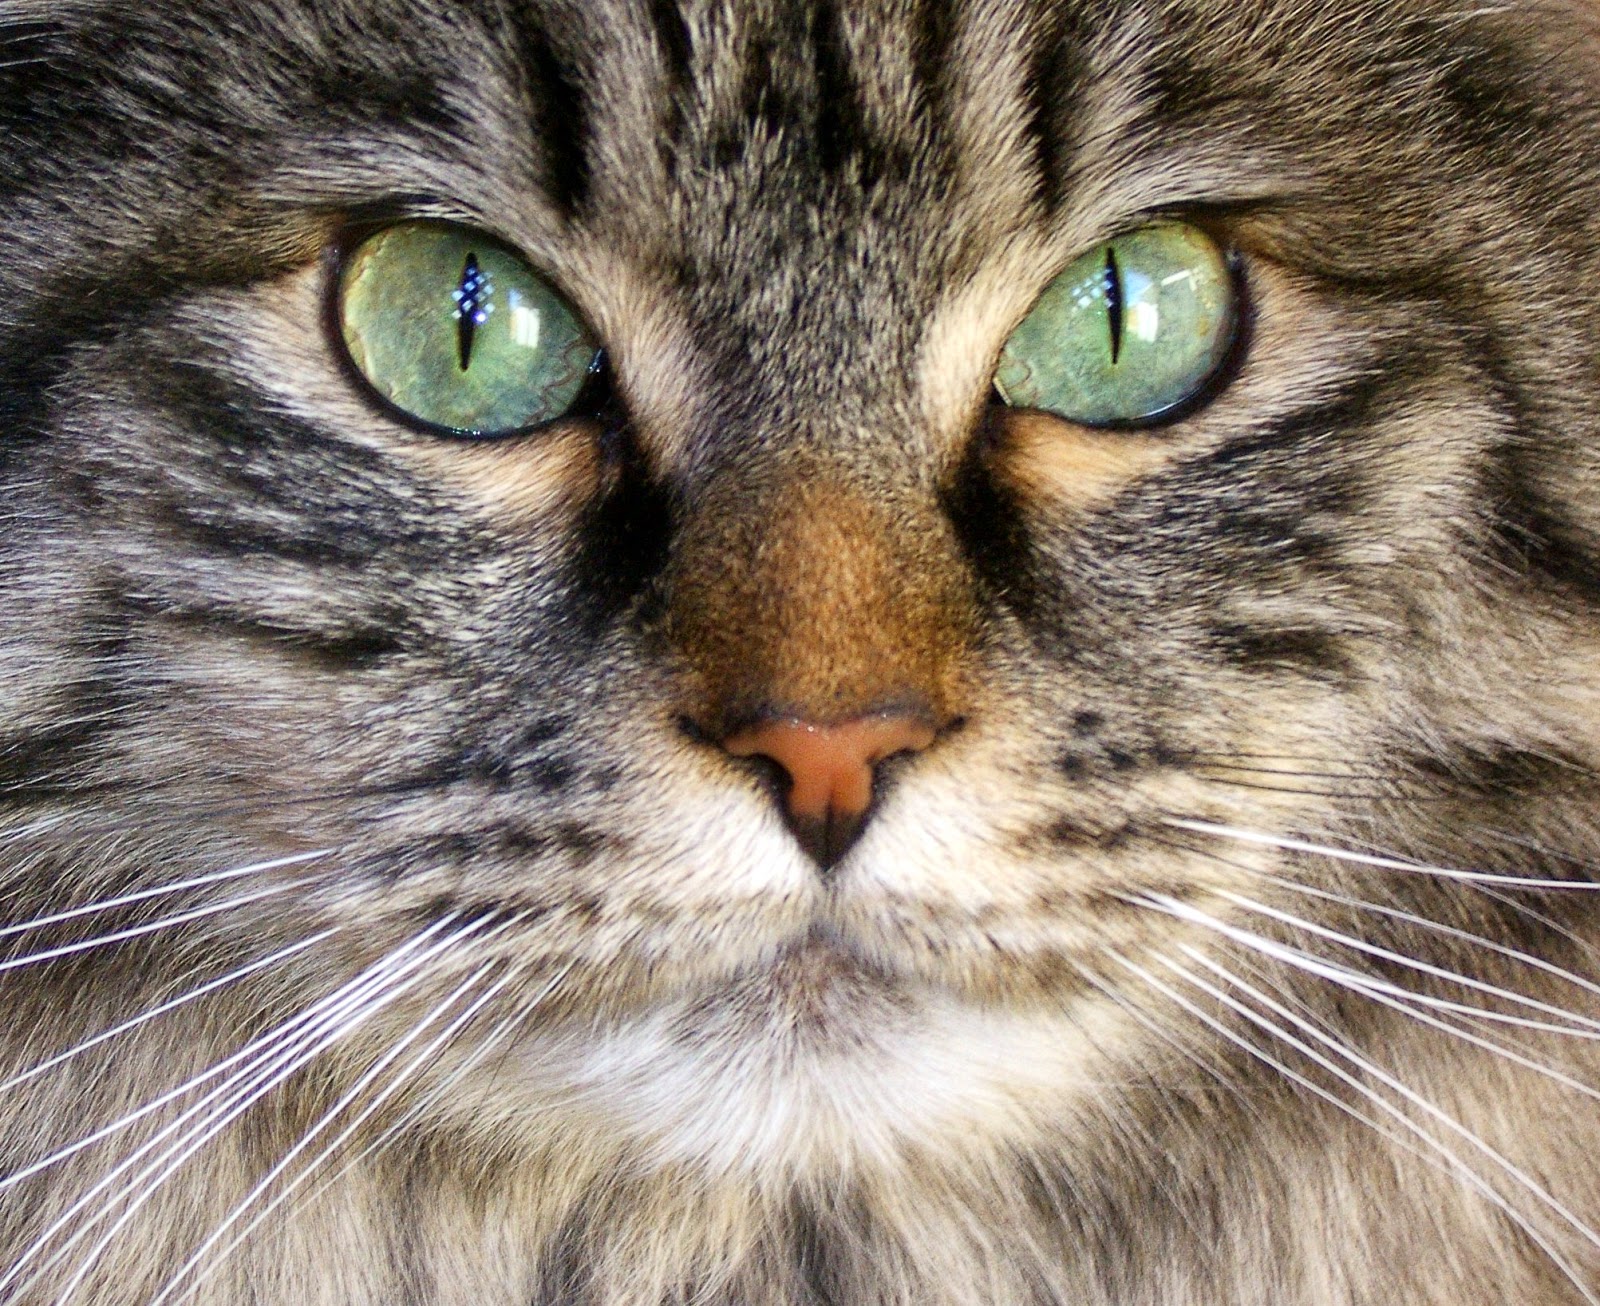 If They Could Talk: Can Your Cat's Eyes Change Color?